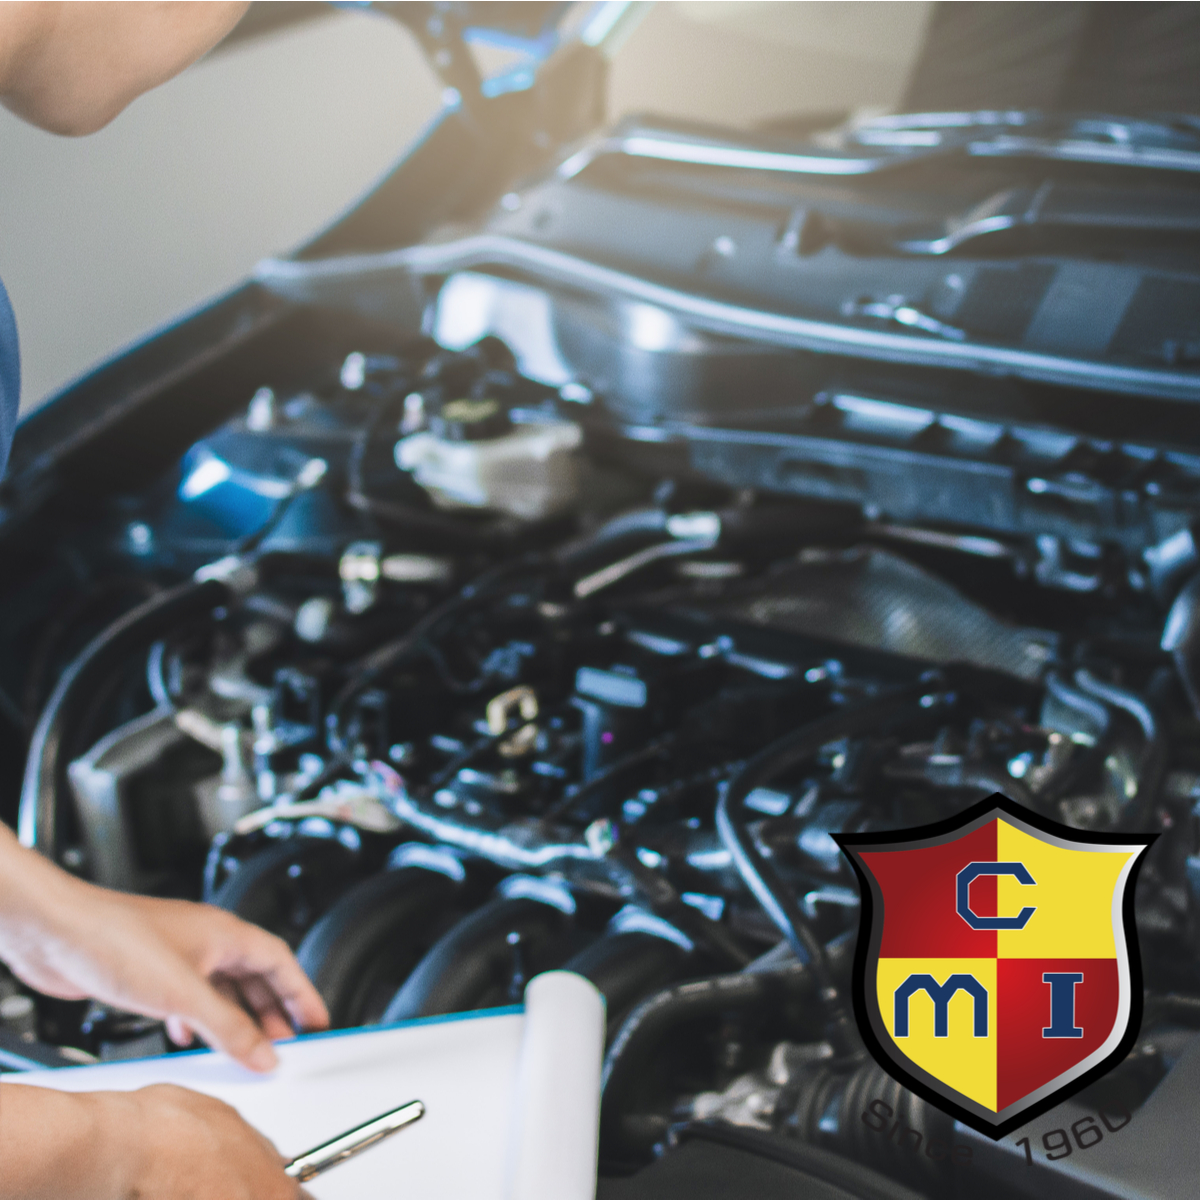 Call Conaway Motors for Auto Repair by Certified Professionals in the Automotive Field!